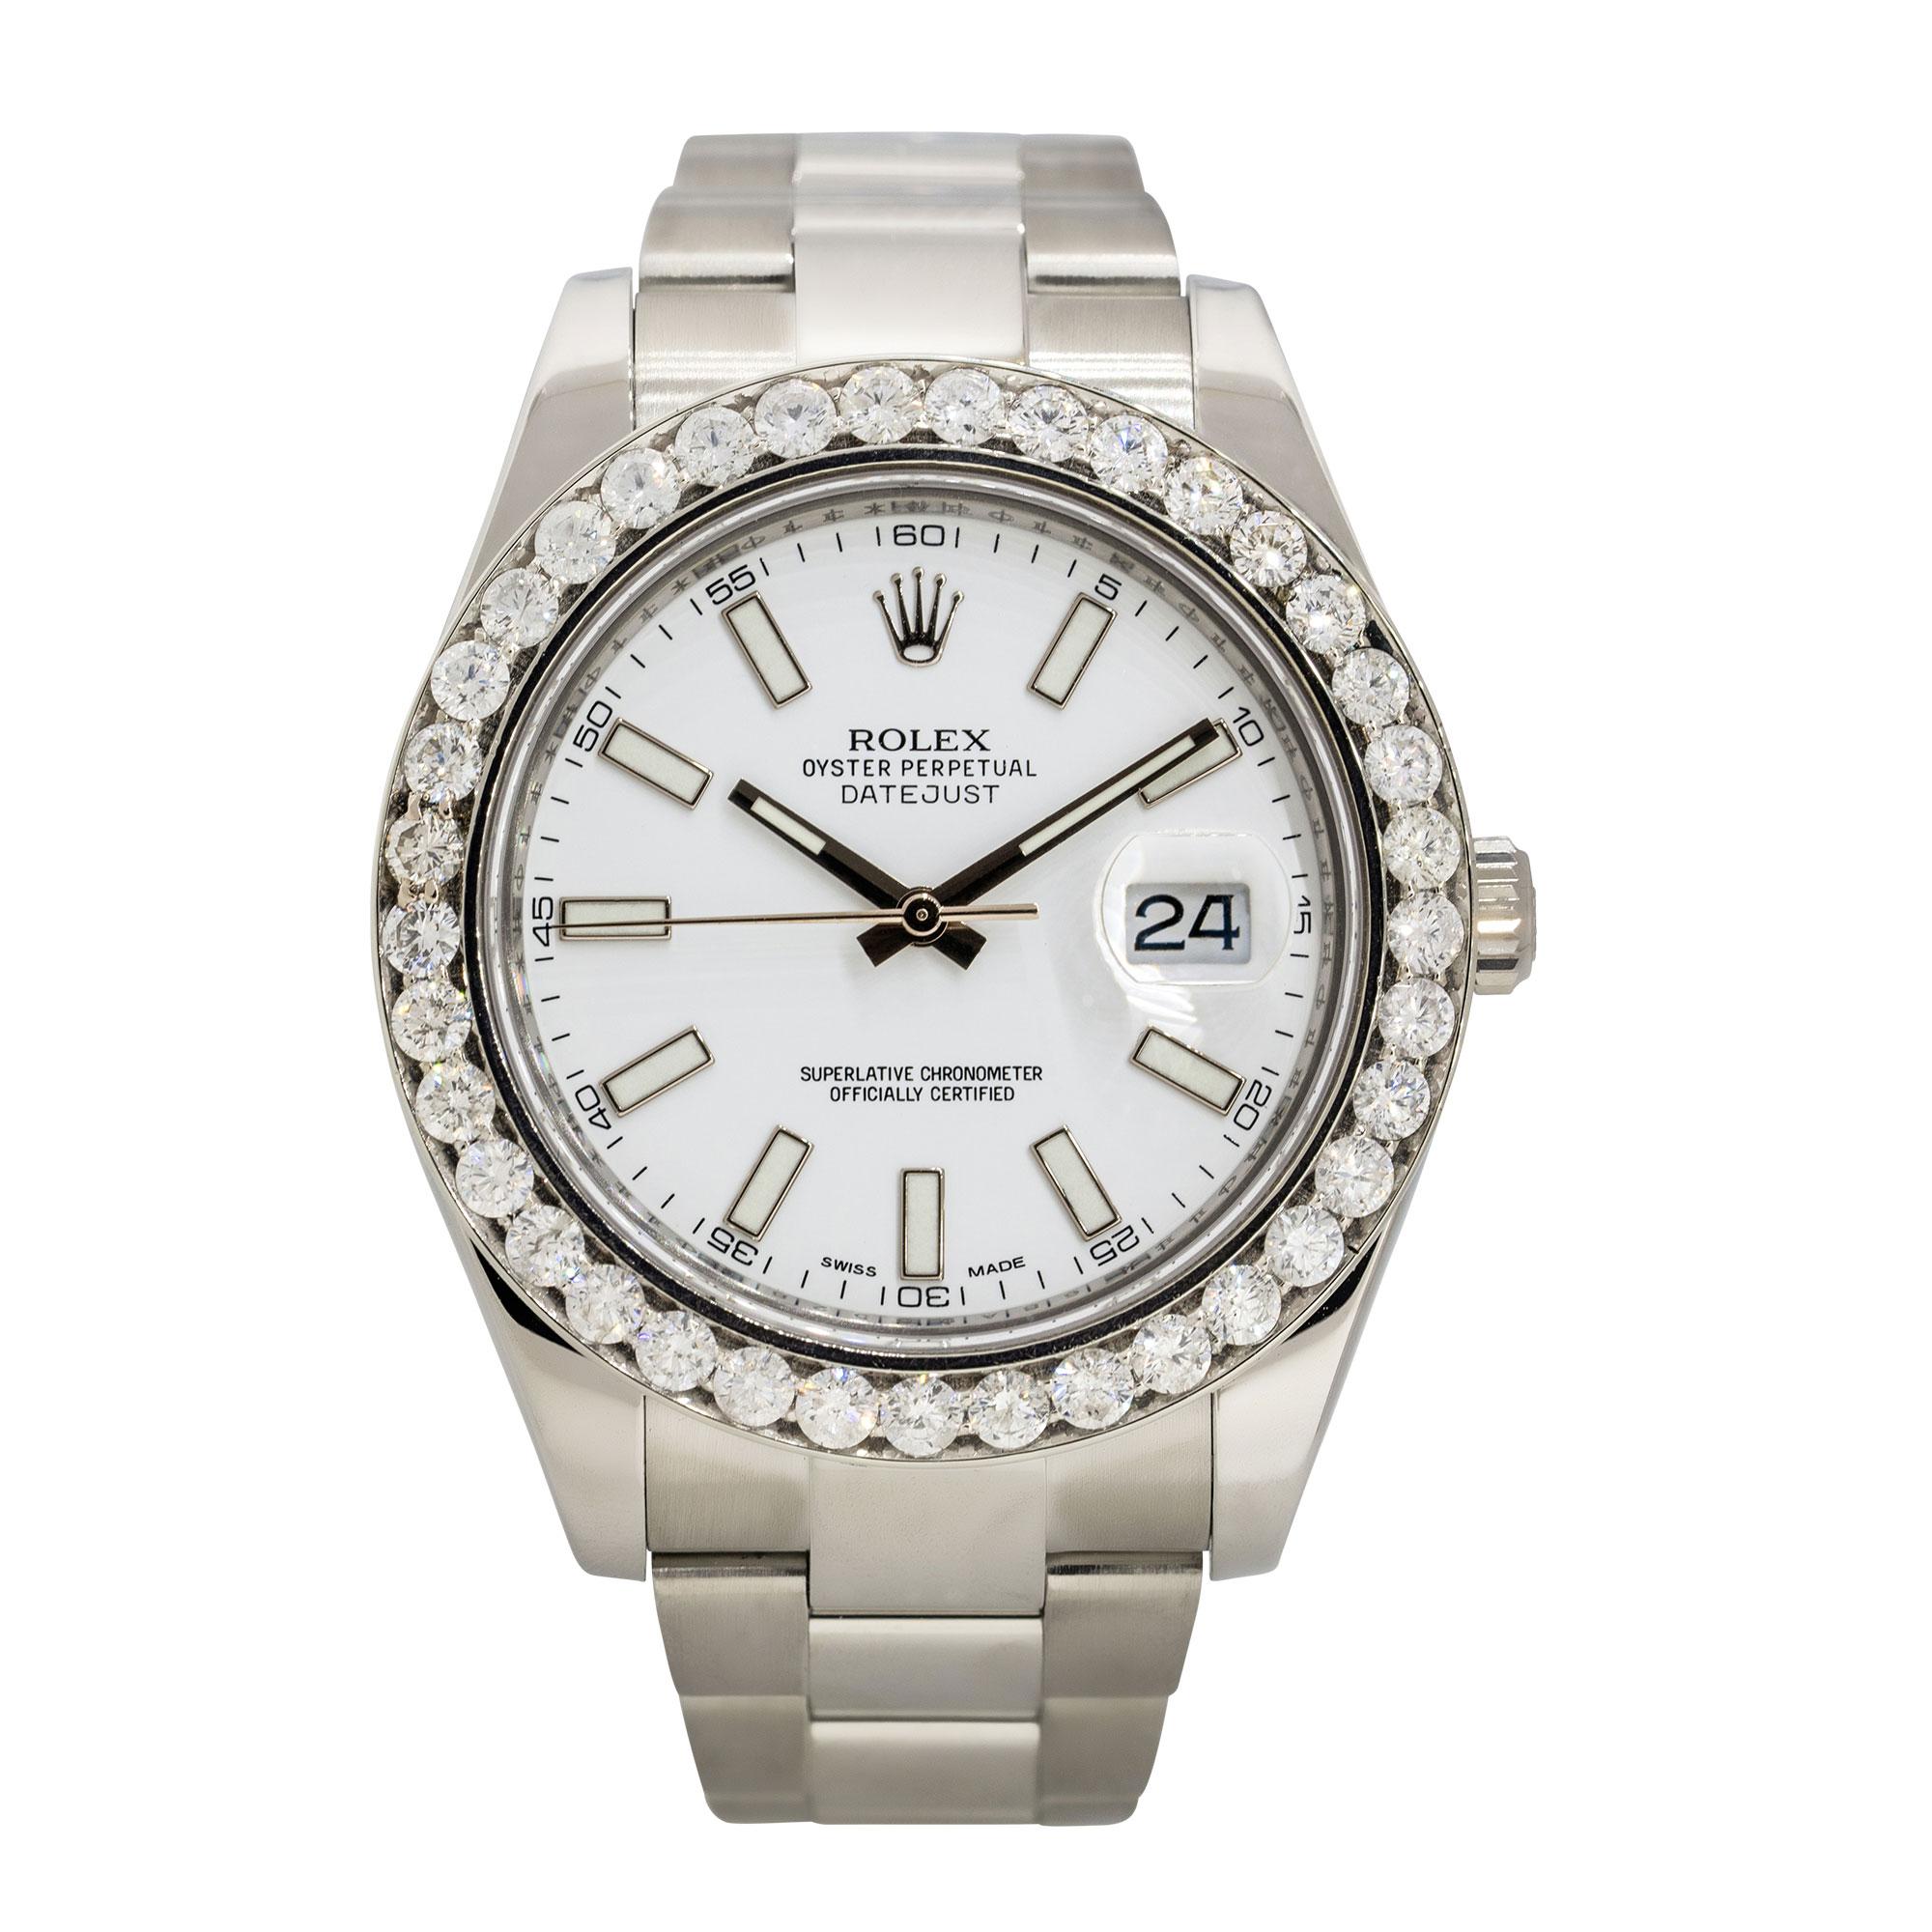 Brand: Rolex
MPN: 116300
Model: Datejust II
Case Material: Stainless Steel
Case Diameter: 41mm
Crystal: Sapphire Crystal
Bezel: Round brilliant diamond pave bezel (aftermarket)
Dial: White plain dial with silver hands and luminescent hour markers.